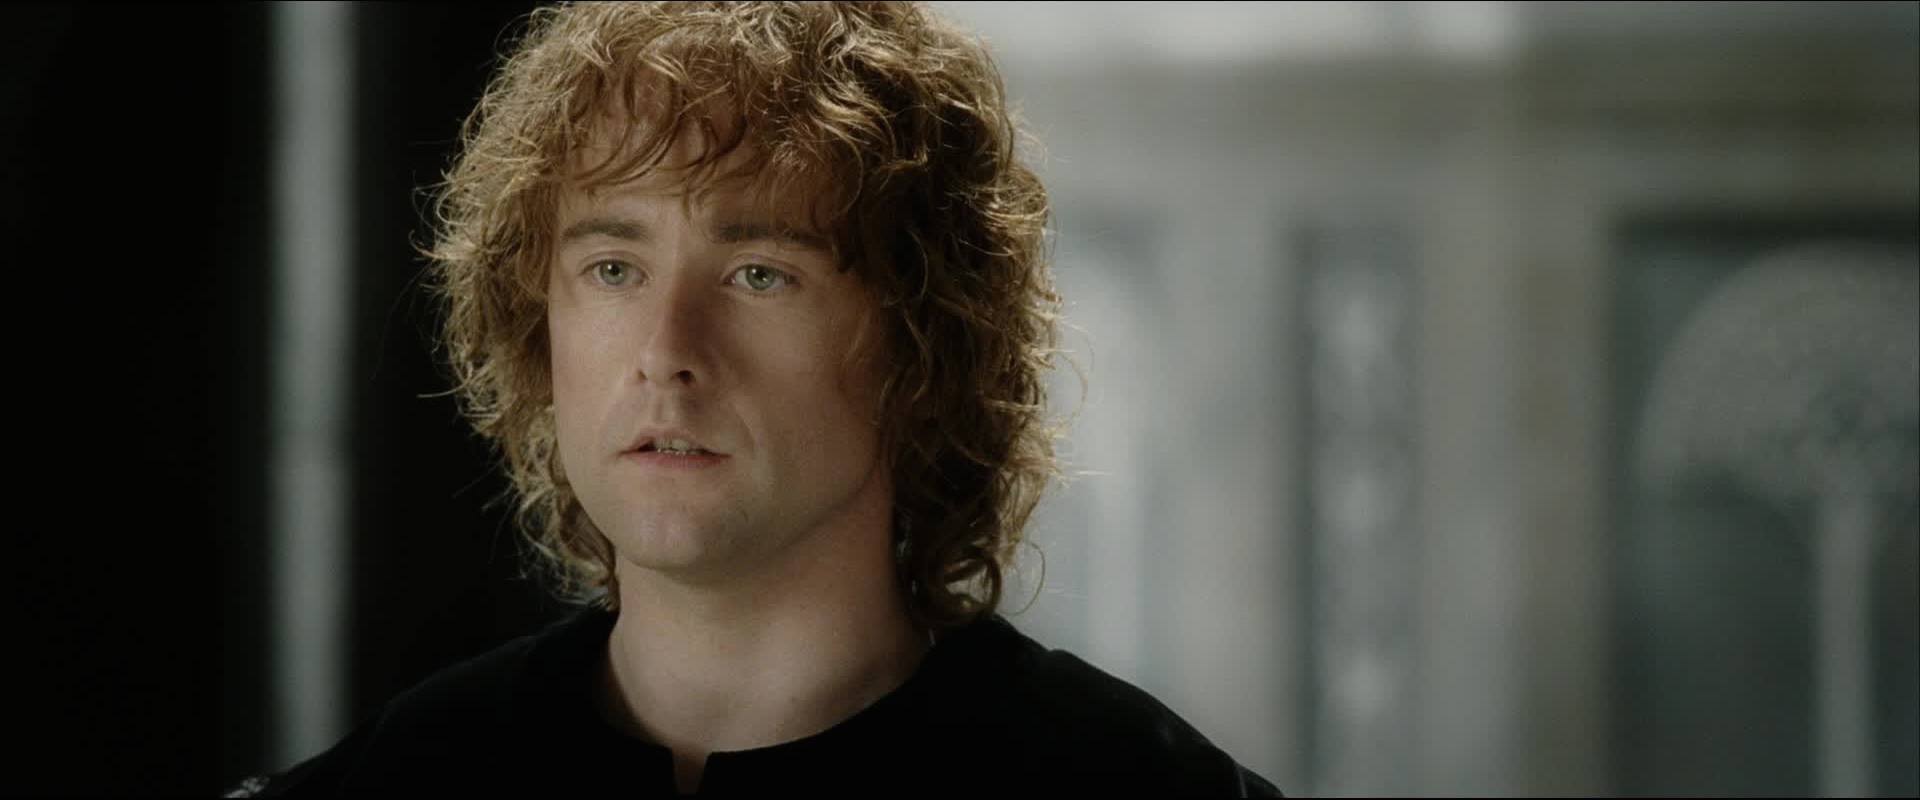 Billy Boyd in The Lord of the Rings: The Return of the King (2003)